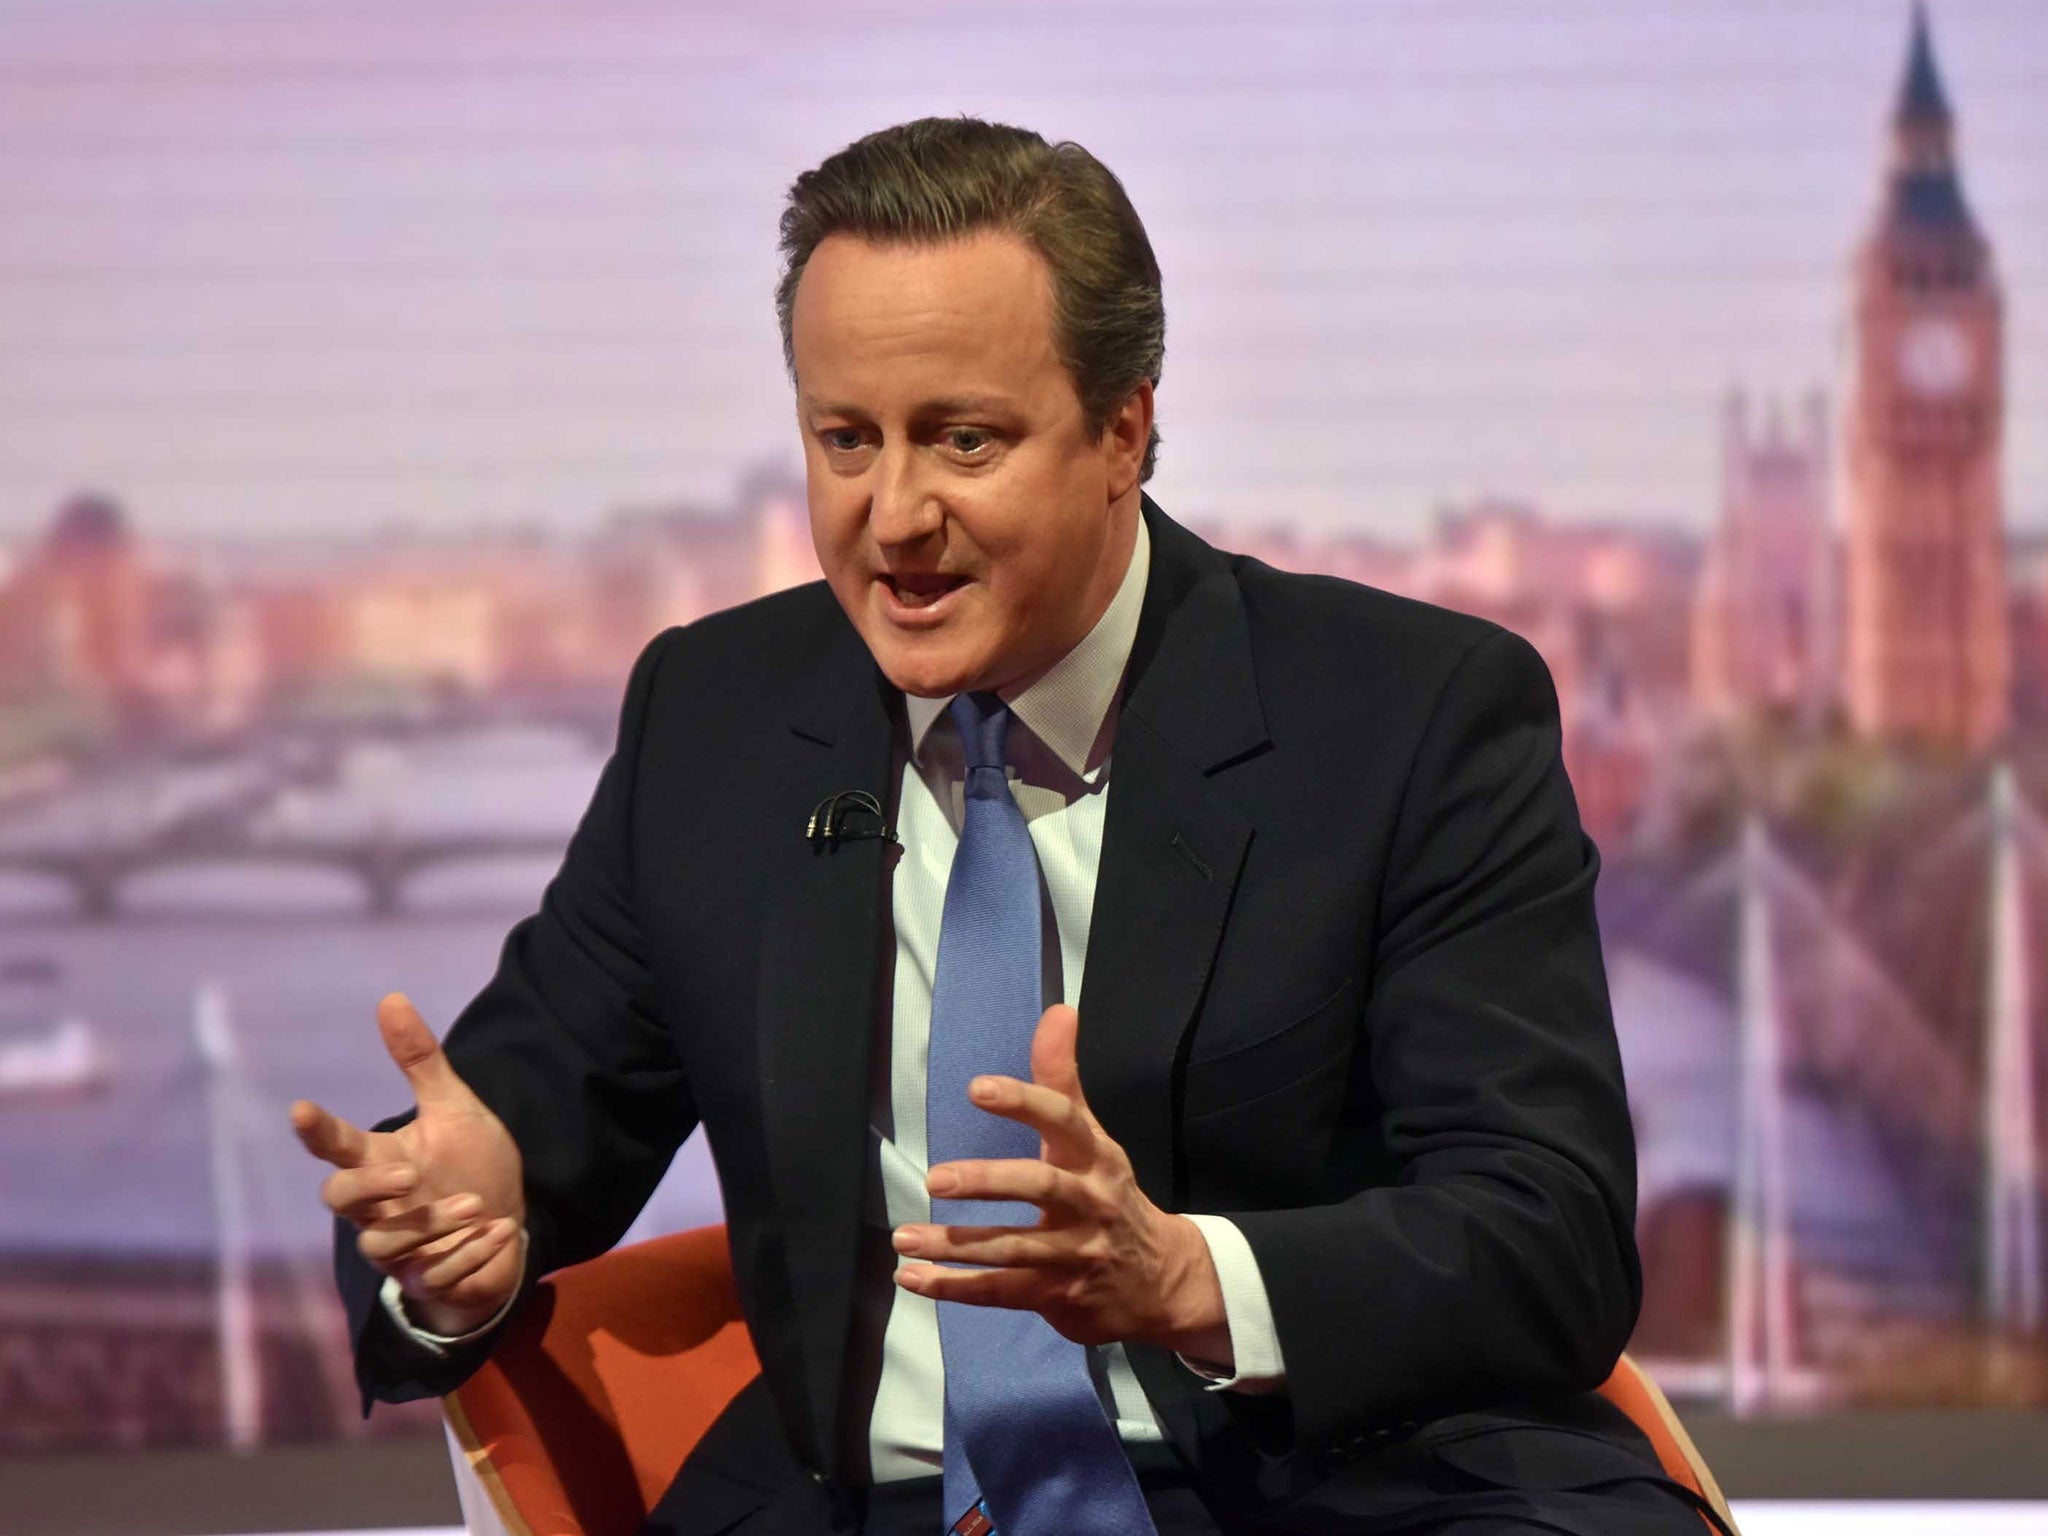 David Cameron tells Andrew Marr a vote for leave would mean a 'lost decade for Britain'